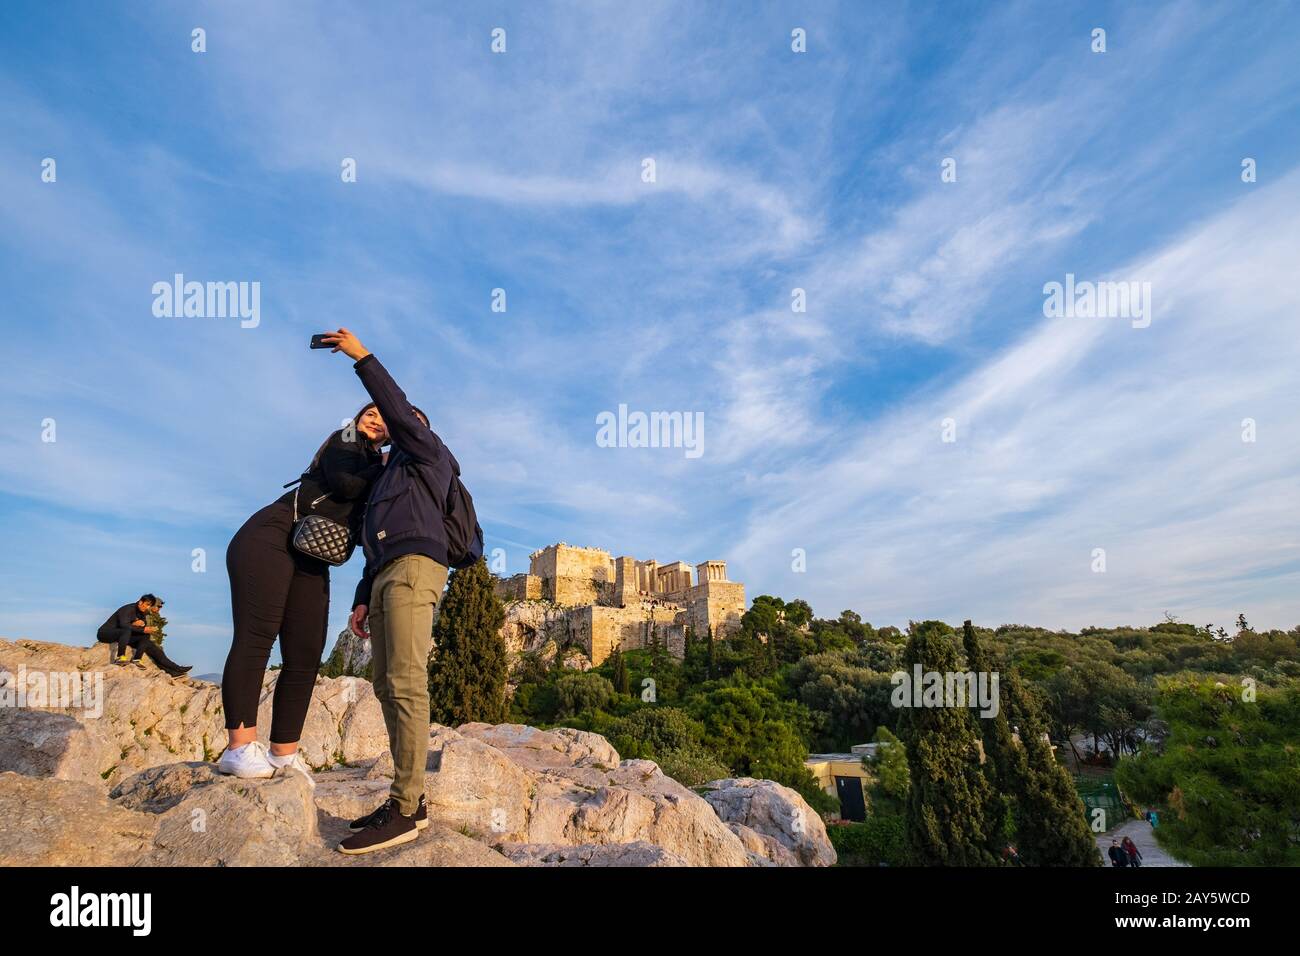 Athens, Greece - January 25, 2020: A couple are taking a selfie on a hill across the Acropolis rock with the Acropolis in the background on a sunny af Stock Photo